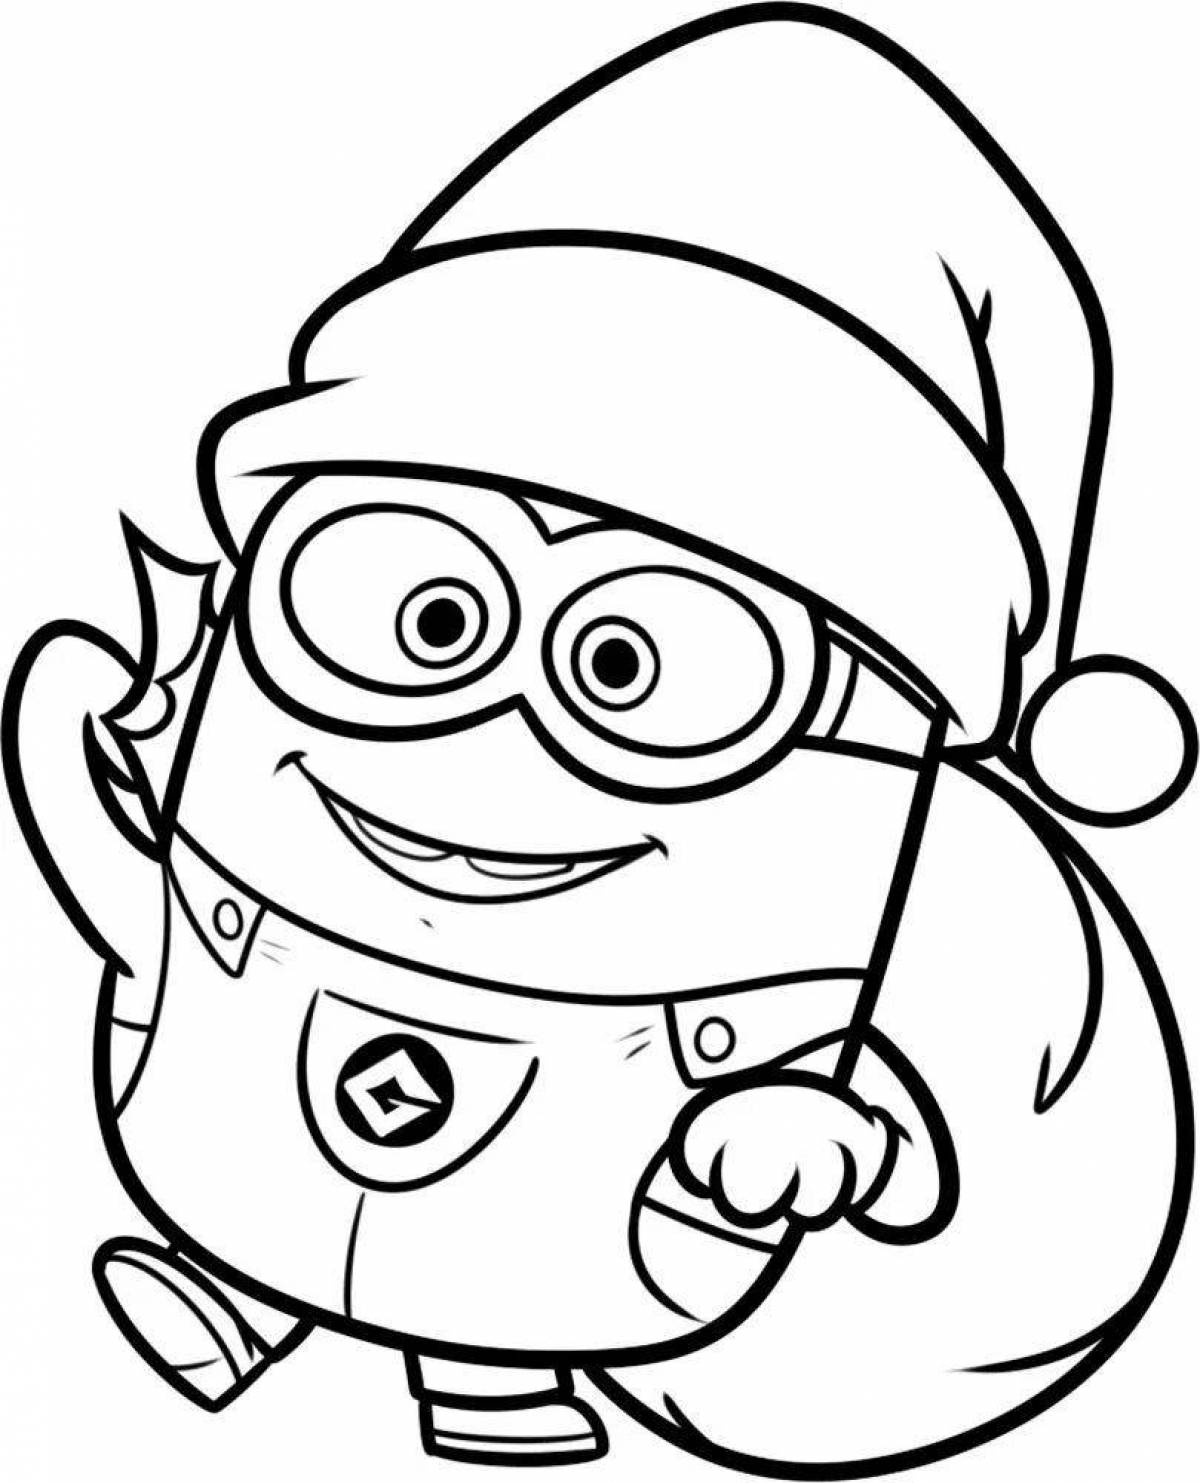 Color-zany minion new year coloring page